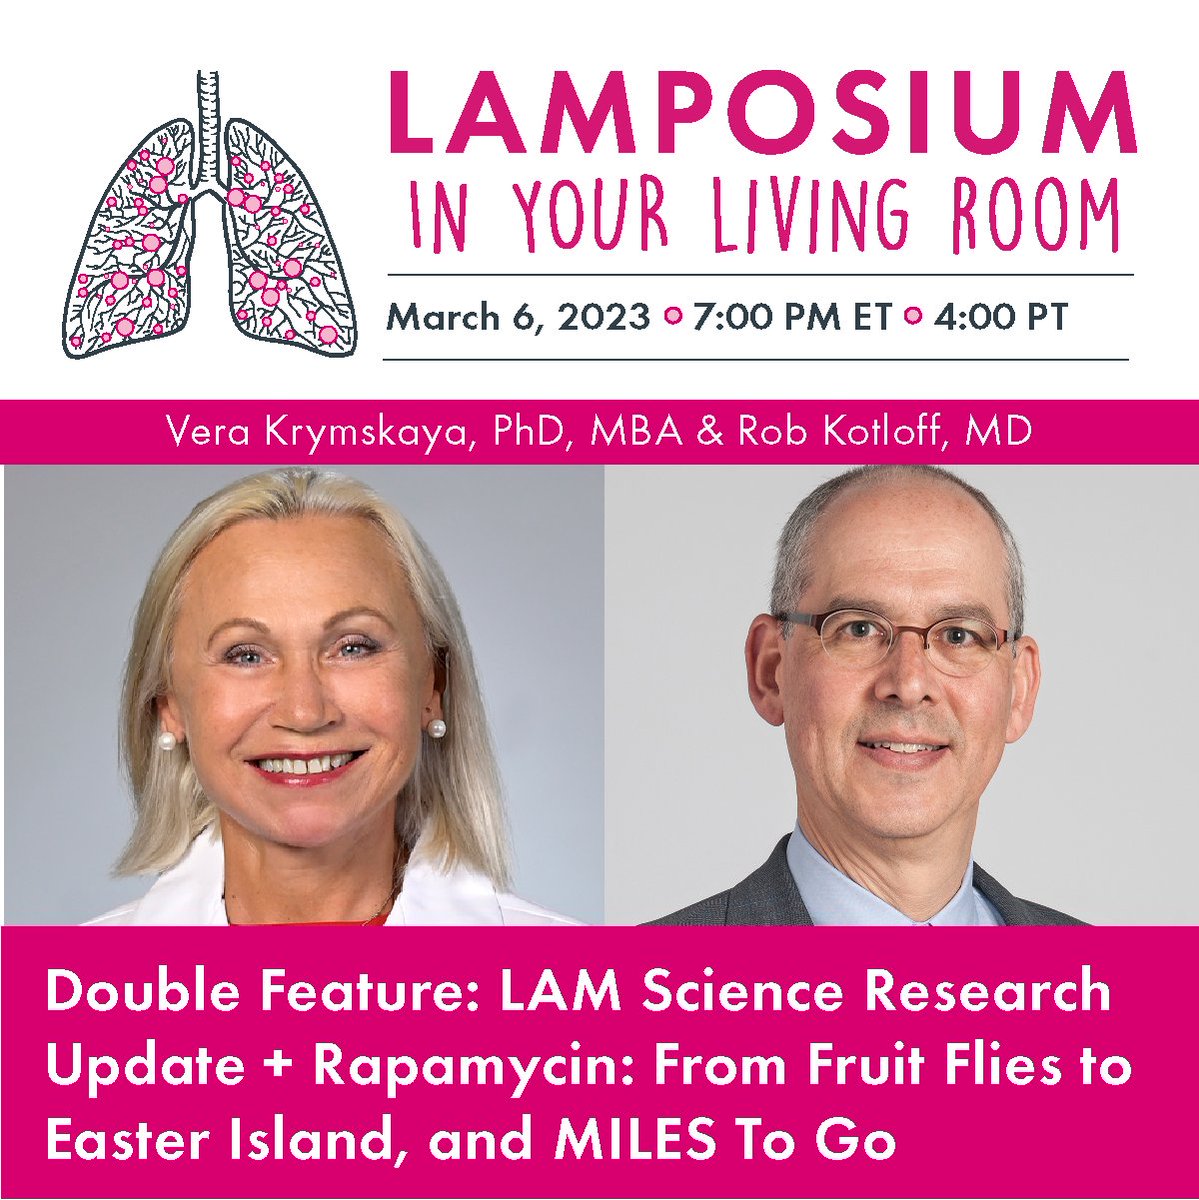 Join us on 3/6 for an engaging LAMposium in your Living Room featuring our Scientific Director Dr. Vera Krymskaya, and LAM Clinic Director Dr. Rob Kotloff. Click the link below to learn details about the presentation and register.

bit.ly/3T2jWnD

Sponsored by NDRI